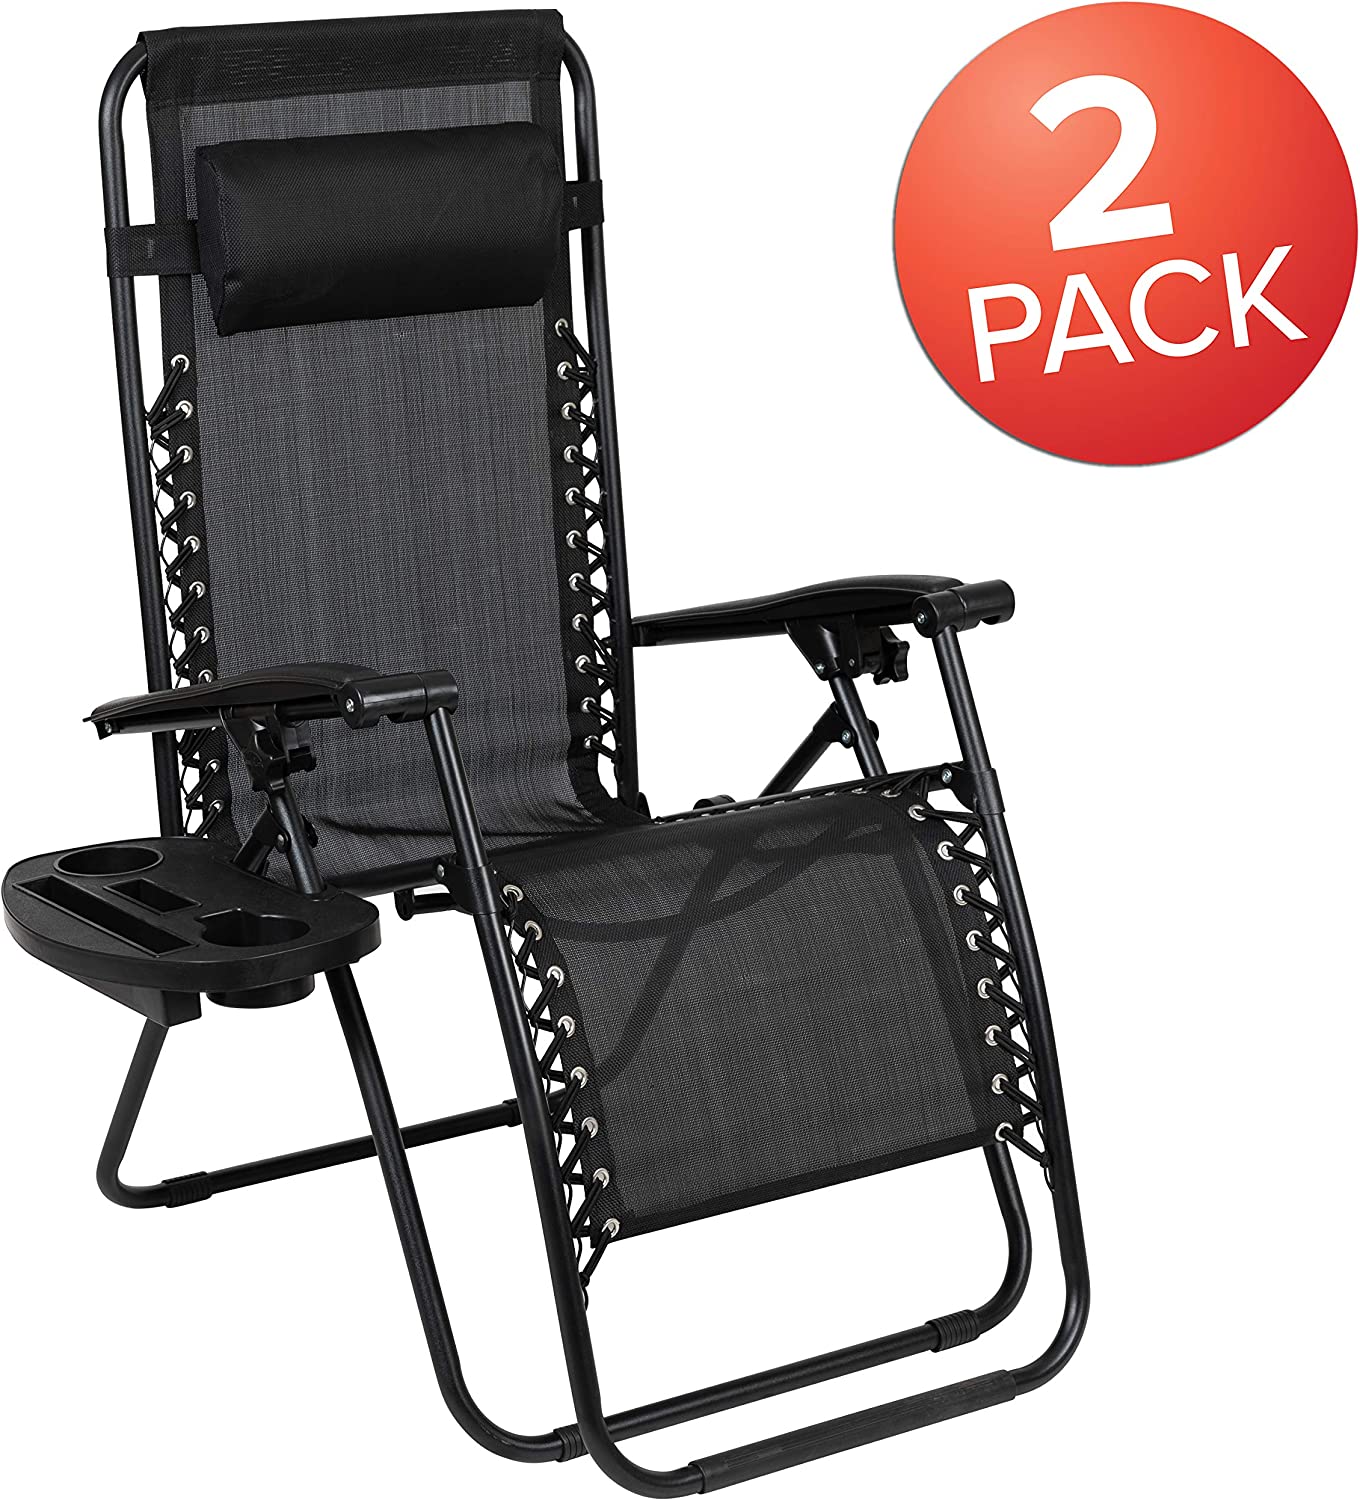 Flash Furniture Adjustable Folding Mesh Zero Gravity Reclining Lounge Chair with Pillow and Cup Holder Tray in Black, Set of 2